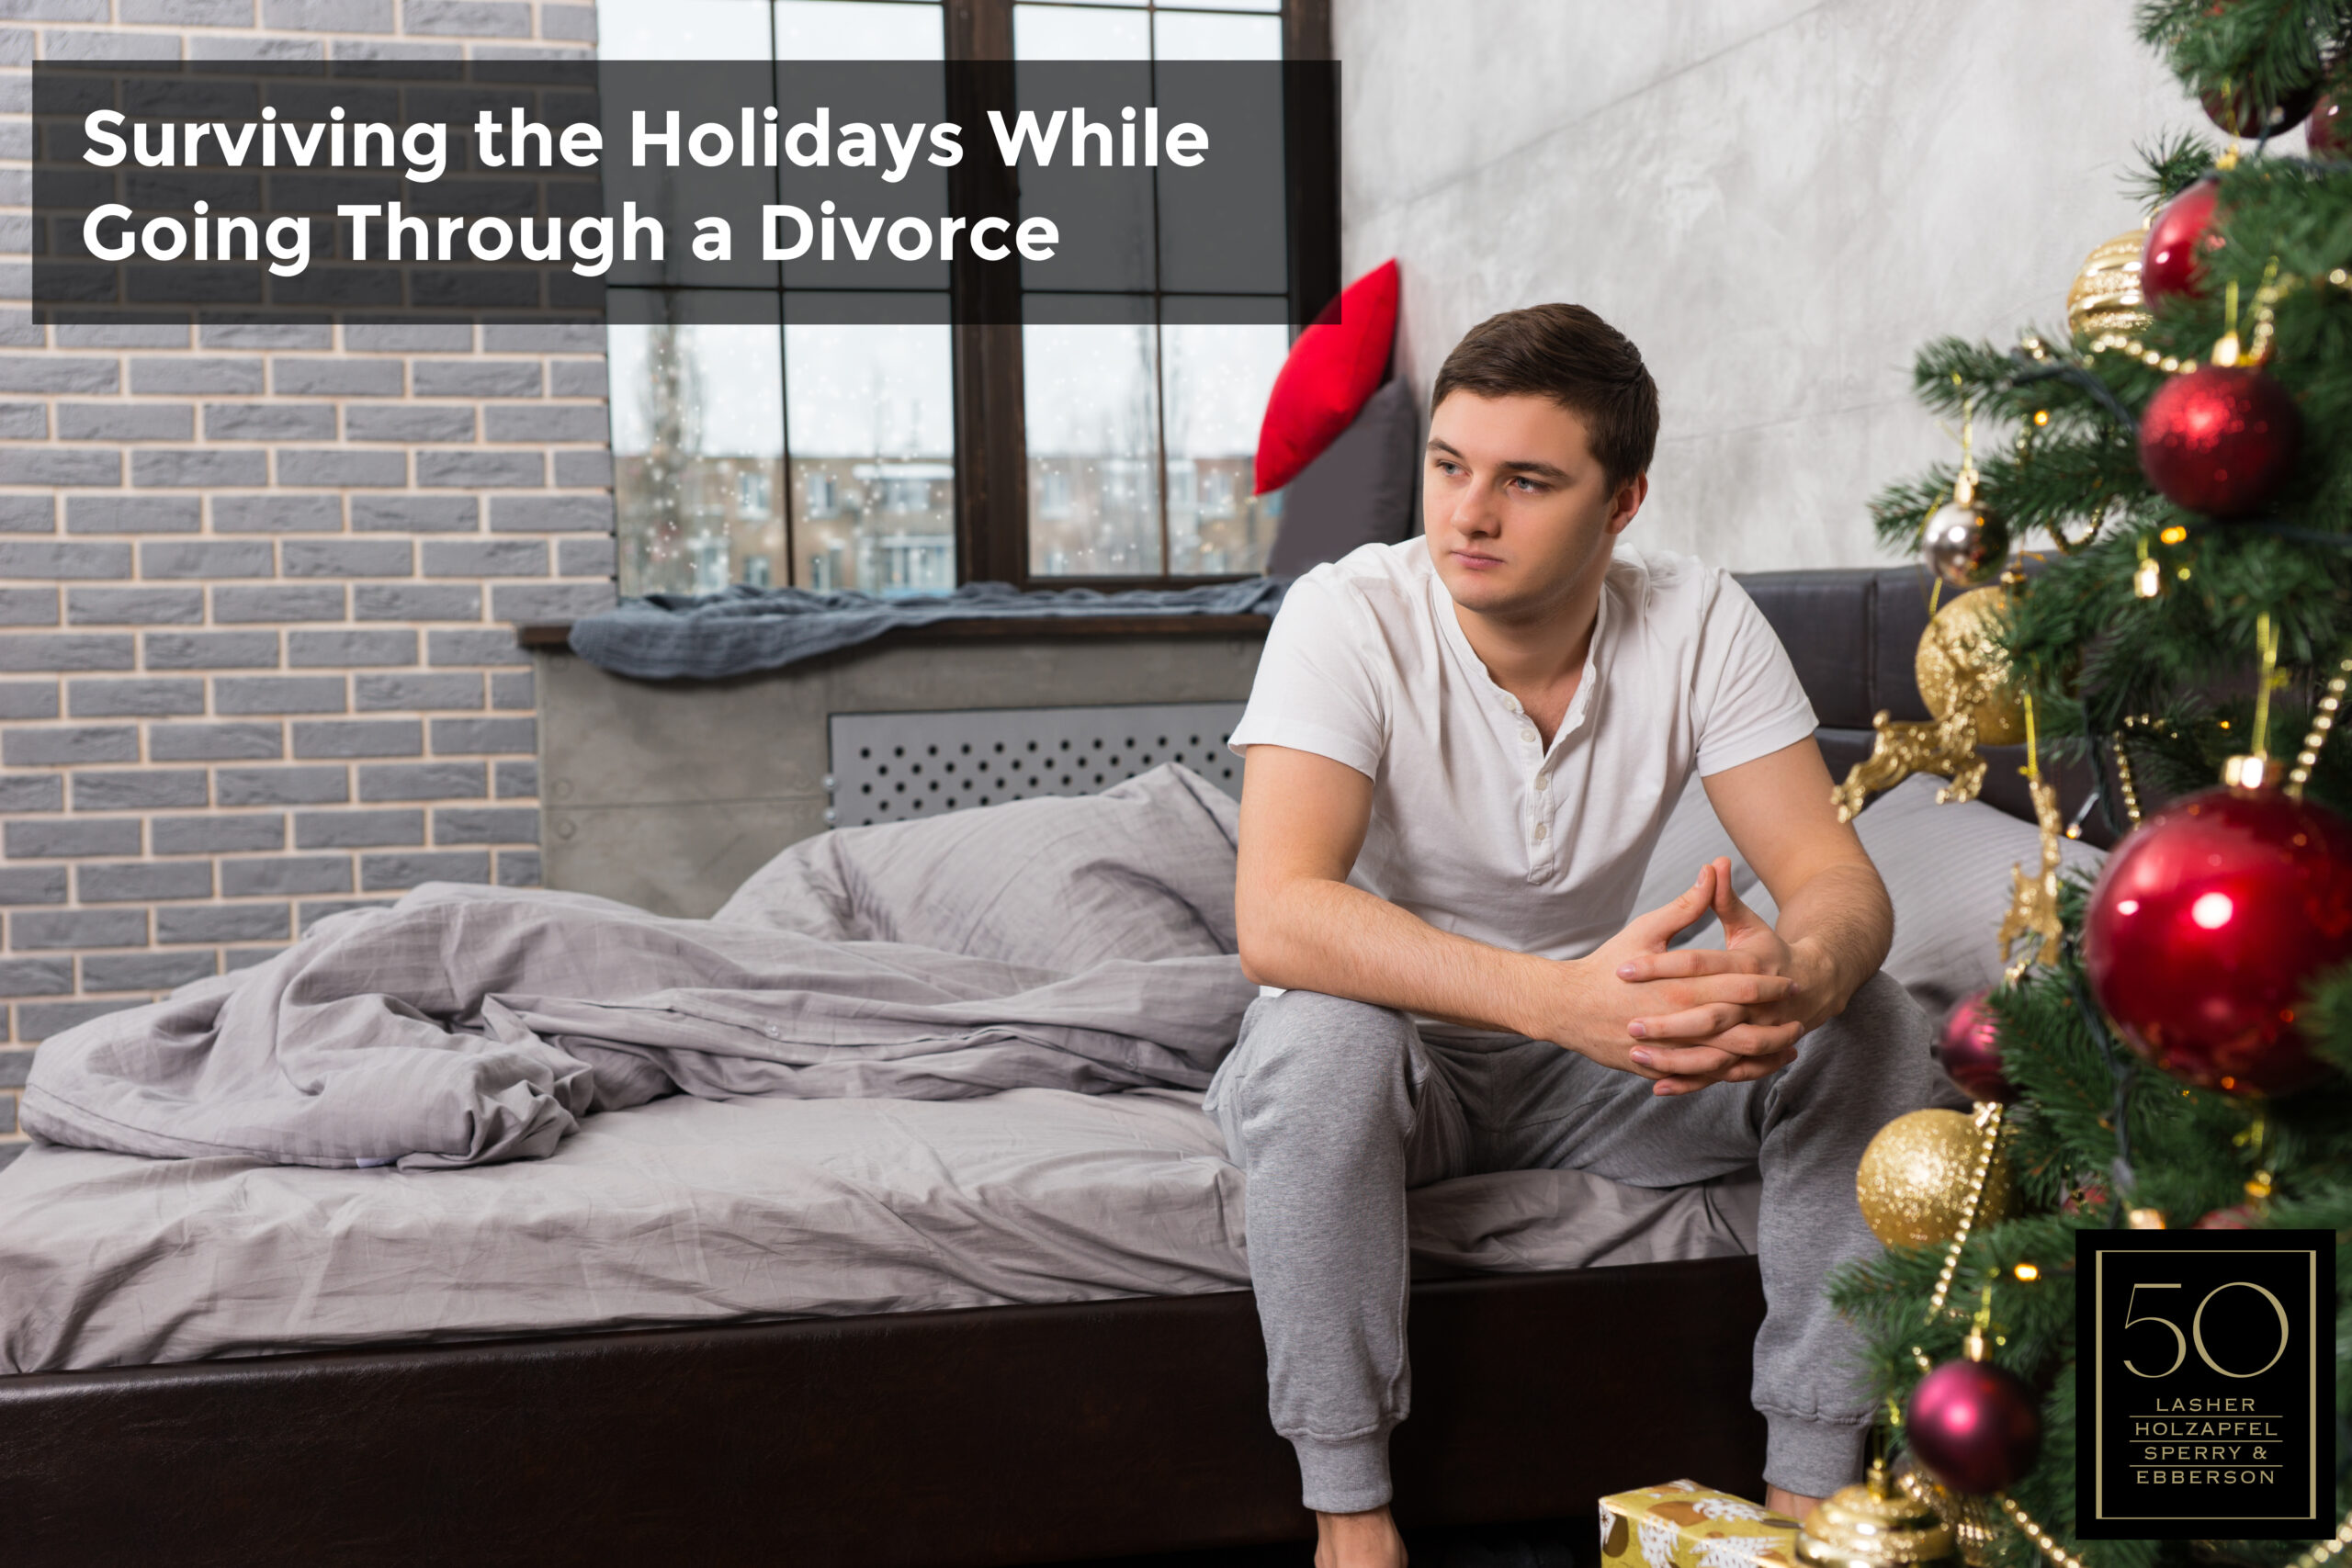 Surviving the Holidays While Going Through a Divorce